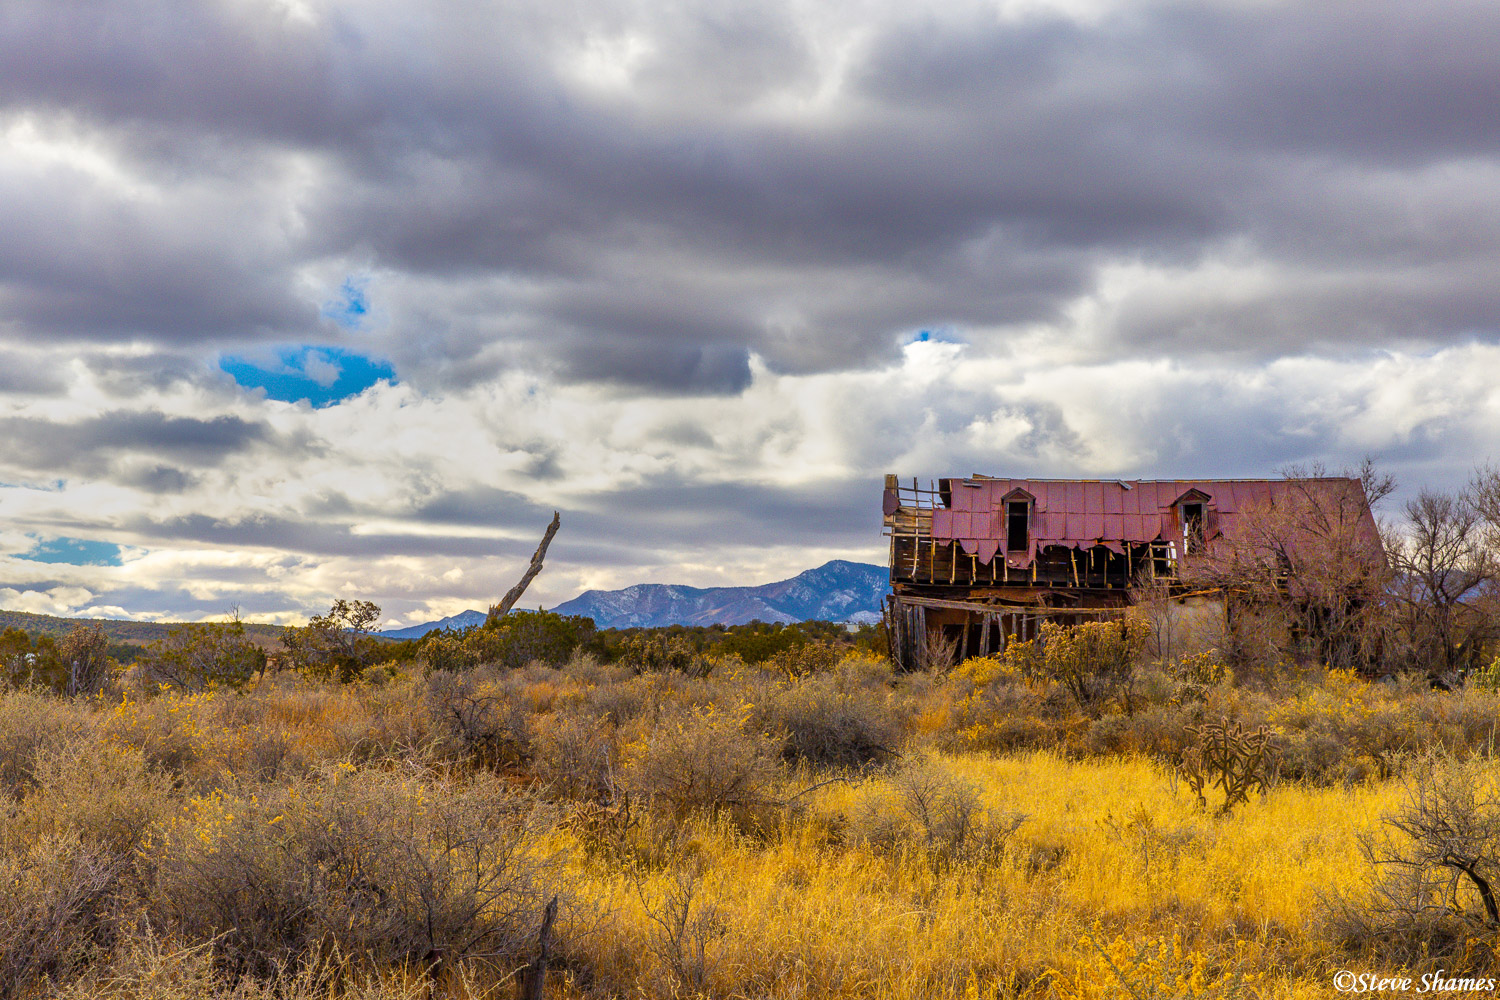 A dilapidated old barn against a stormy sky in rural Torrance County New Mexico.